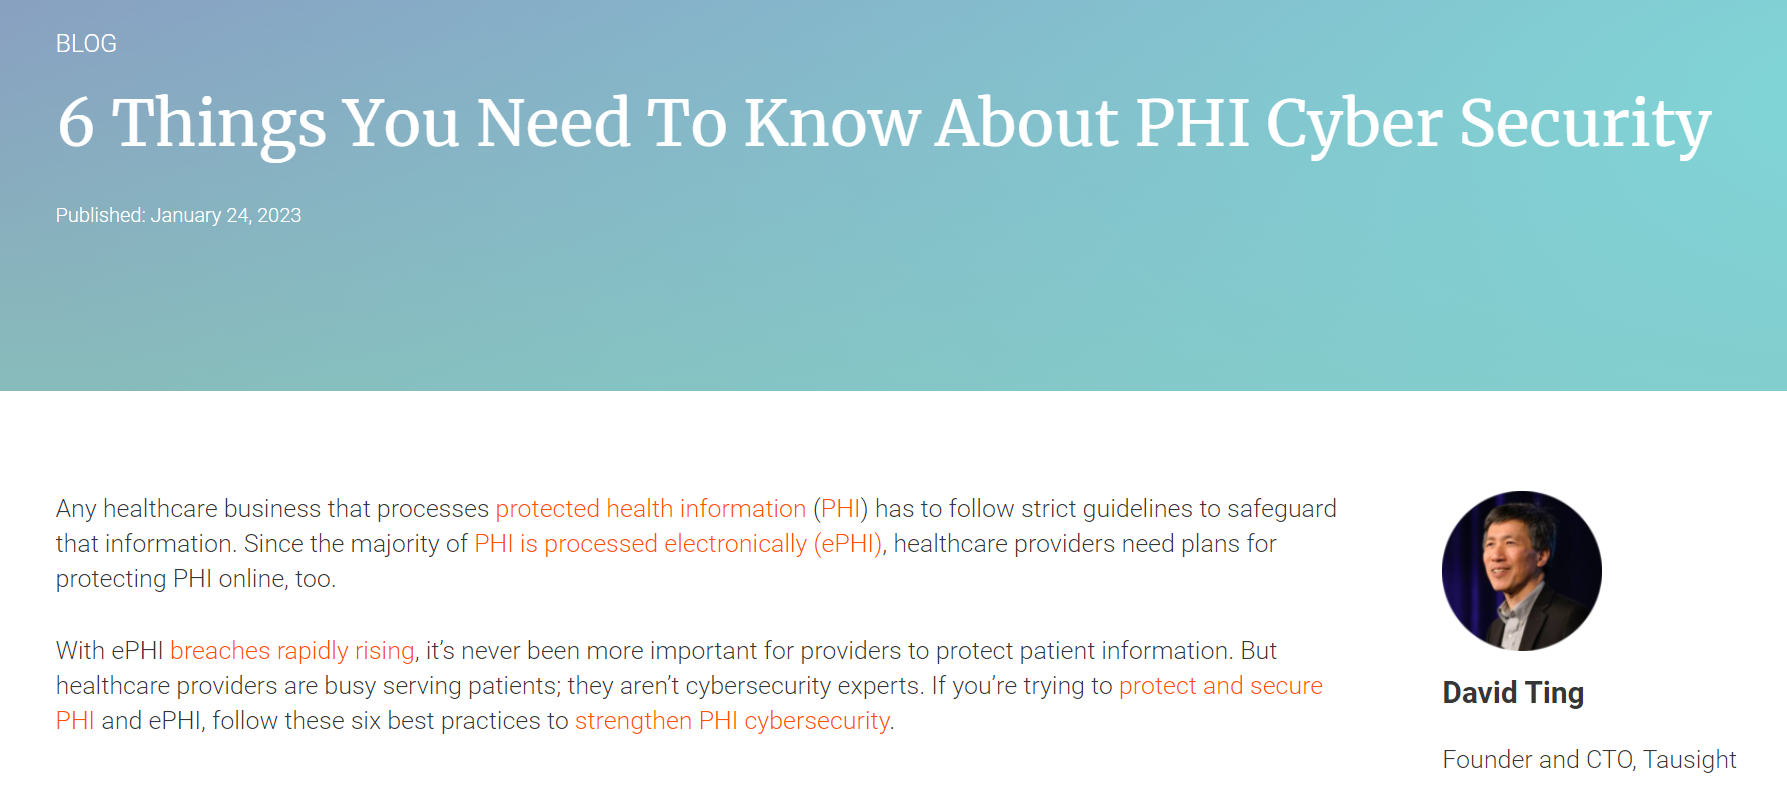 6 Things You Need To Know About PHI Cyber Security